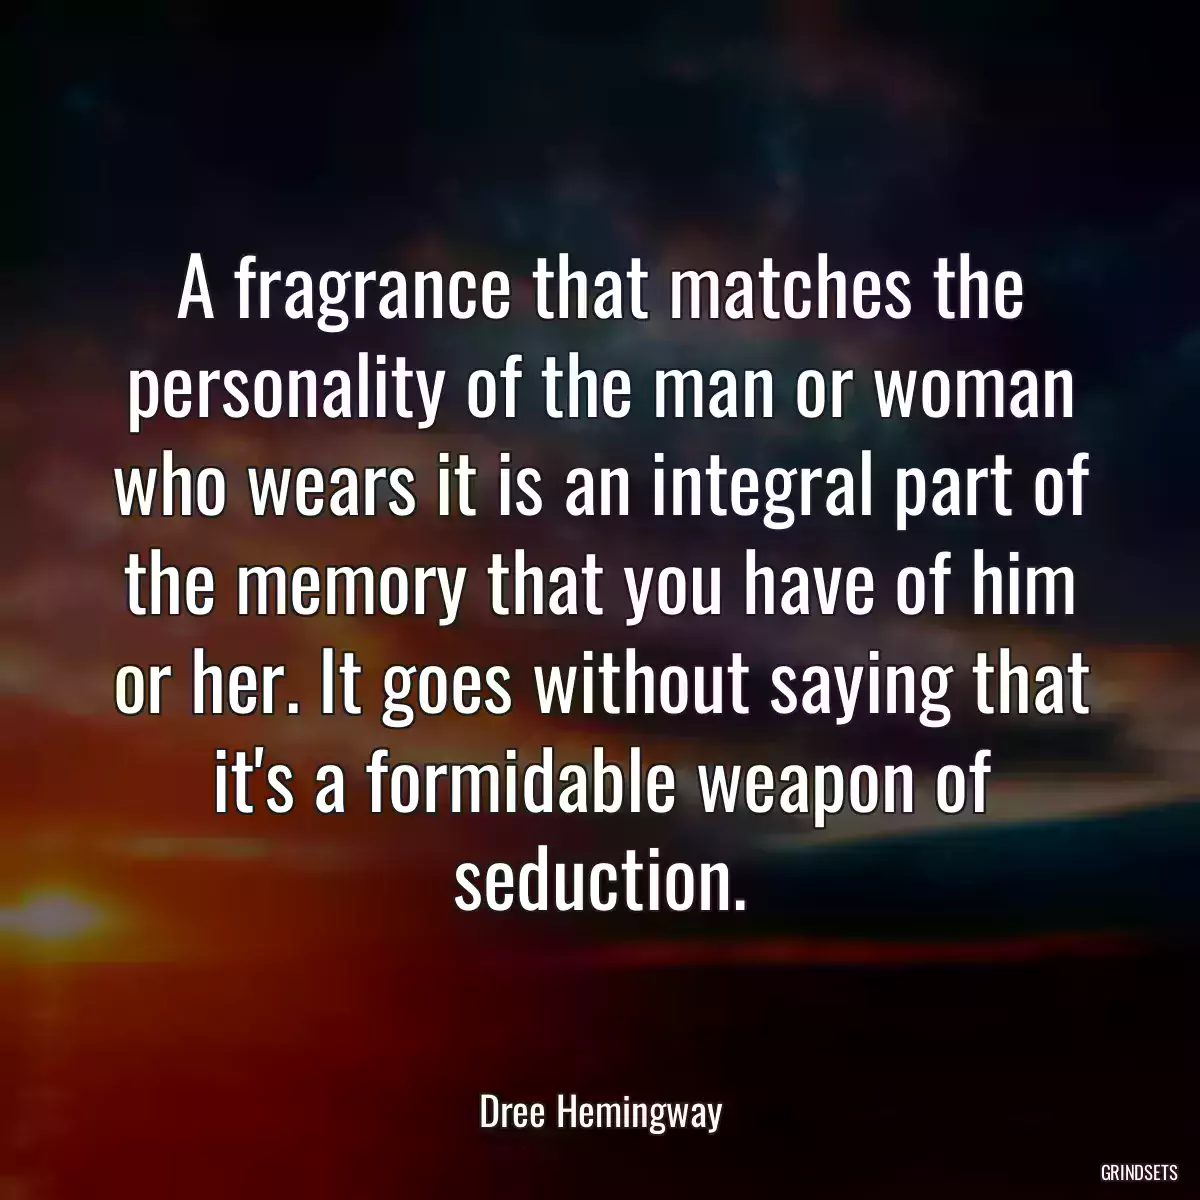 A fragrance that matches the personality of the man or woman who wears it is an integral part of the memory that you have of him or her. It goes without saying that it\'s a formidable weapon of seduction.